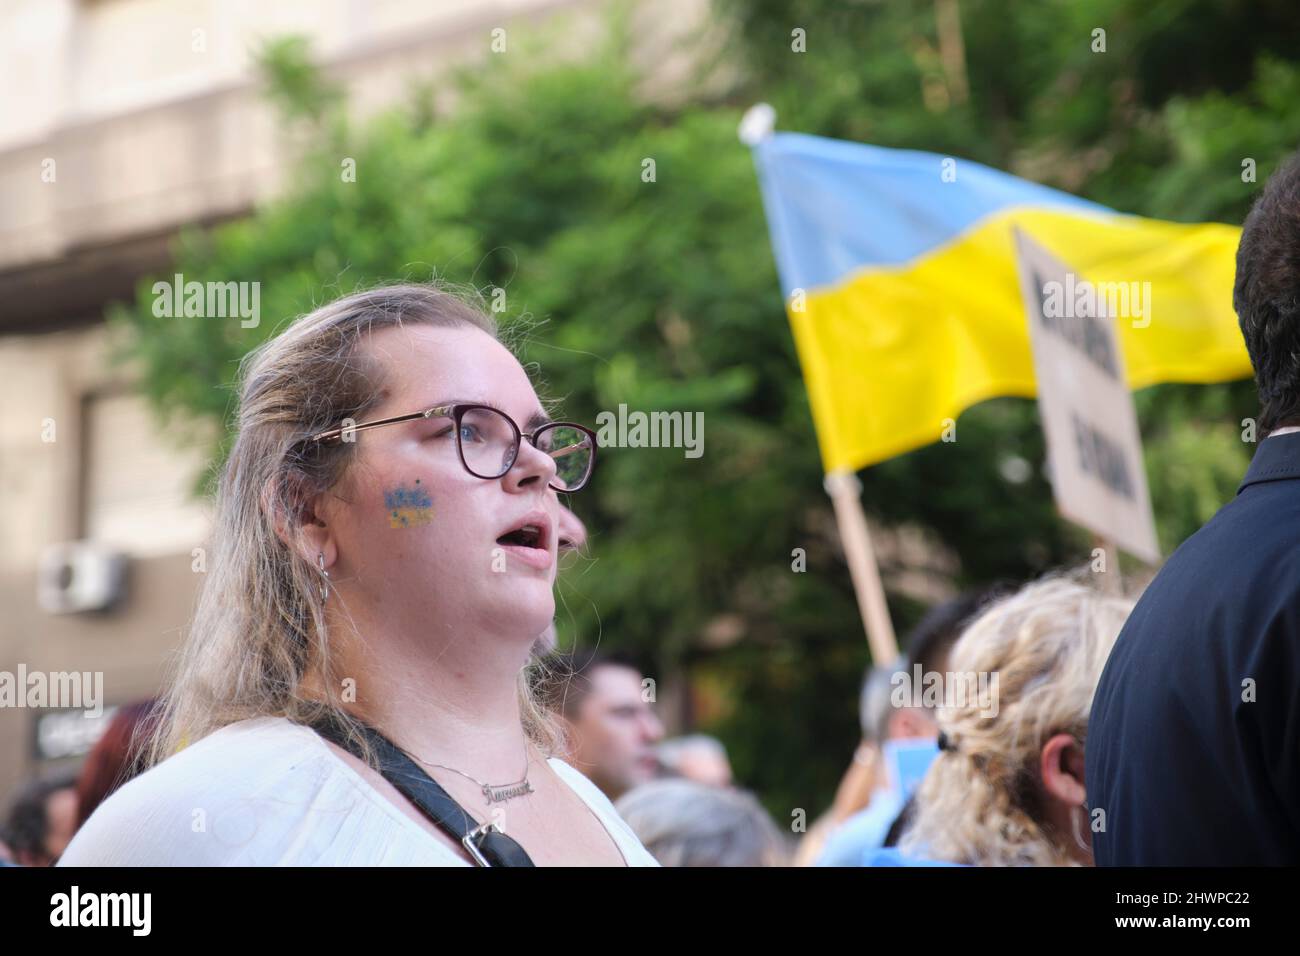 Buenos Aires, Argentina; March 6, 2022: March for peace in Ukraine, against Russian war and invasion. Young woman singing the Ukrainian anthem. Stock Photo